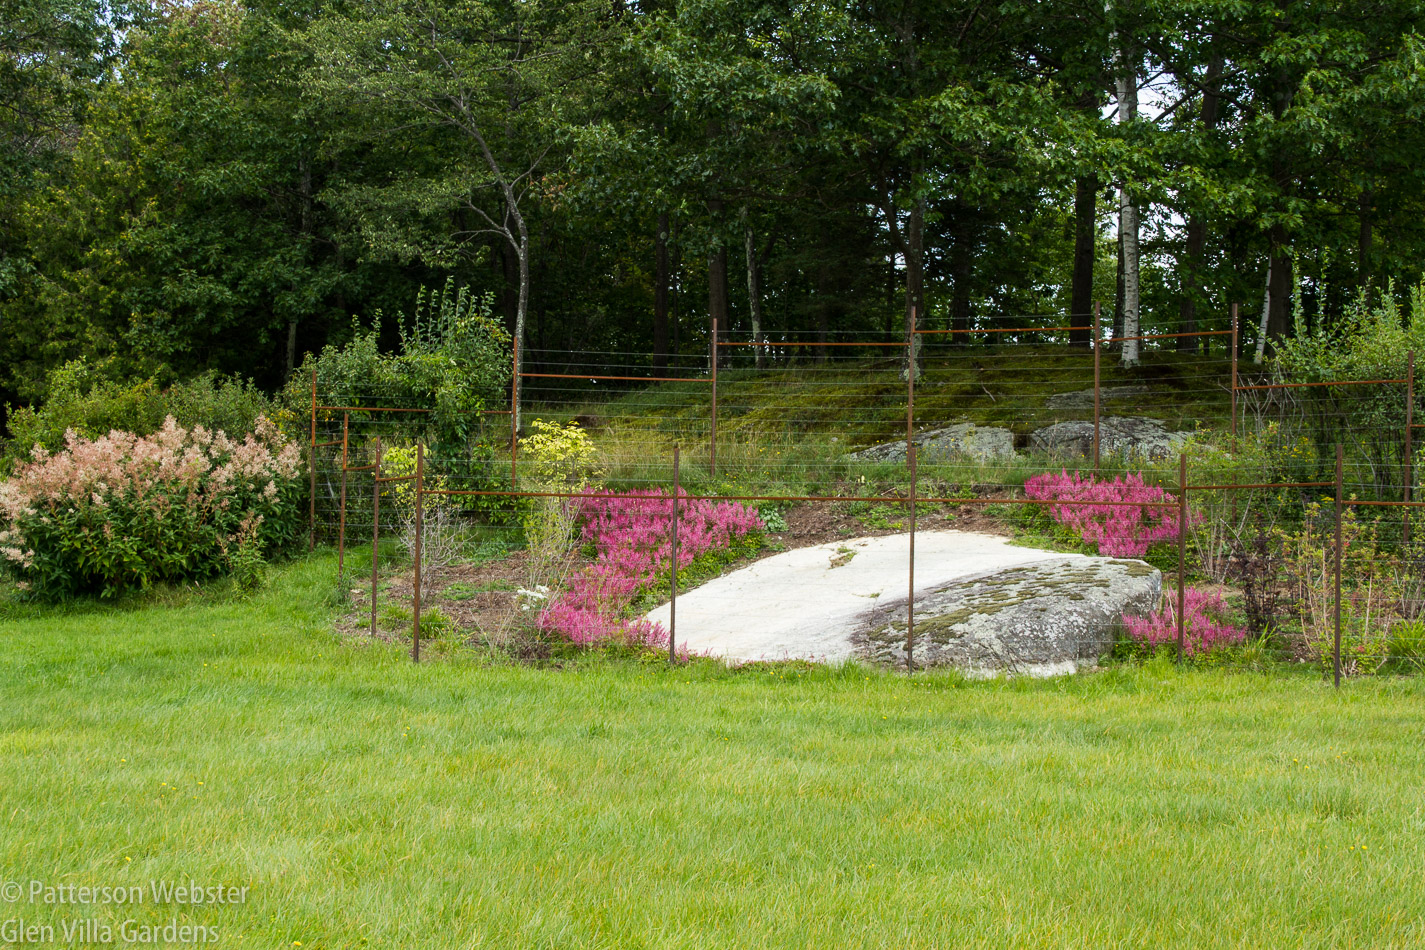 Why a two-toned rock? The white section was buried until last September when we planted this border. 